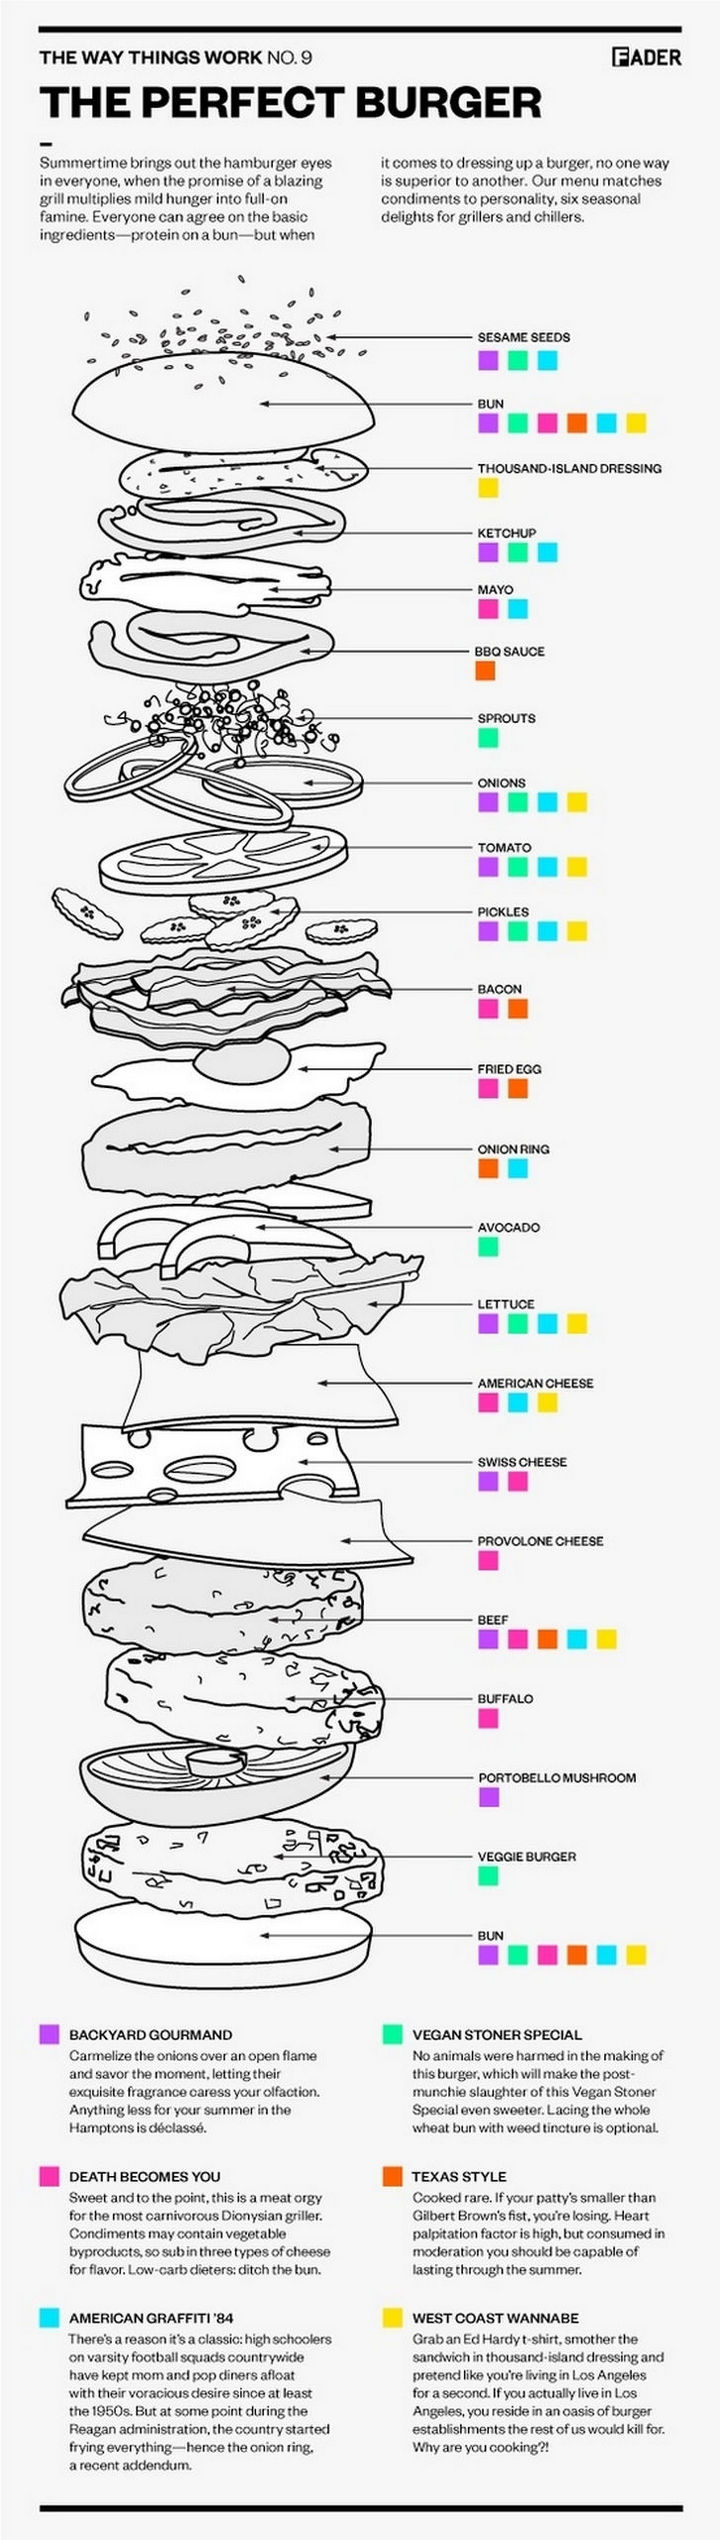 15 Kitchen Cheat Sheets - The perfect burger.